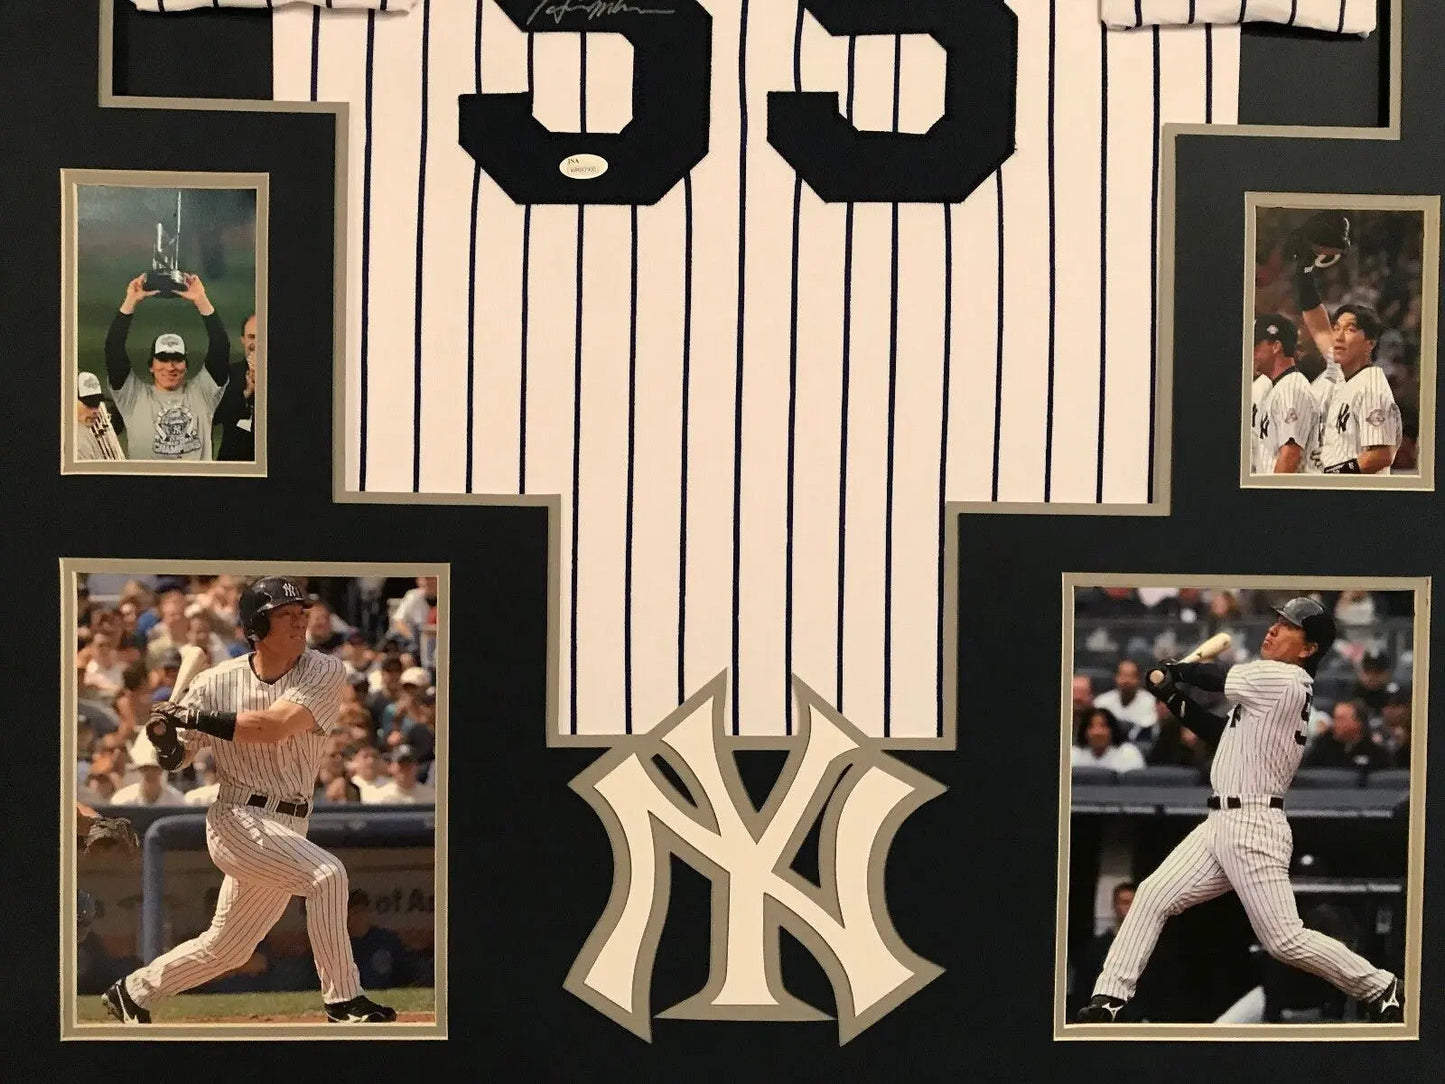 MVP Authentics Framed N.Y. Yankees Matsui Autographed Signed Jersey Jsa Coa 539.10 sports jersey framing , jersey framing